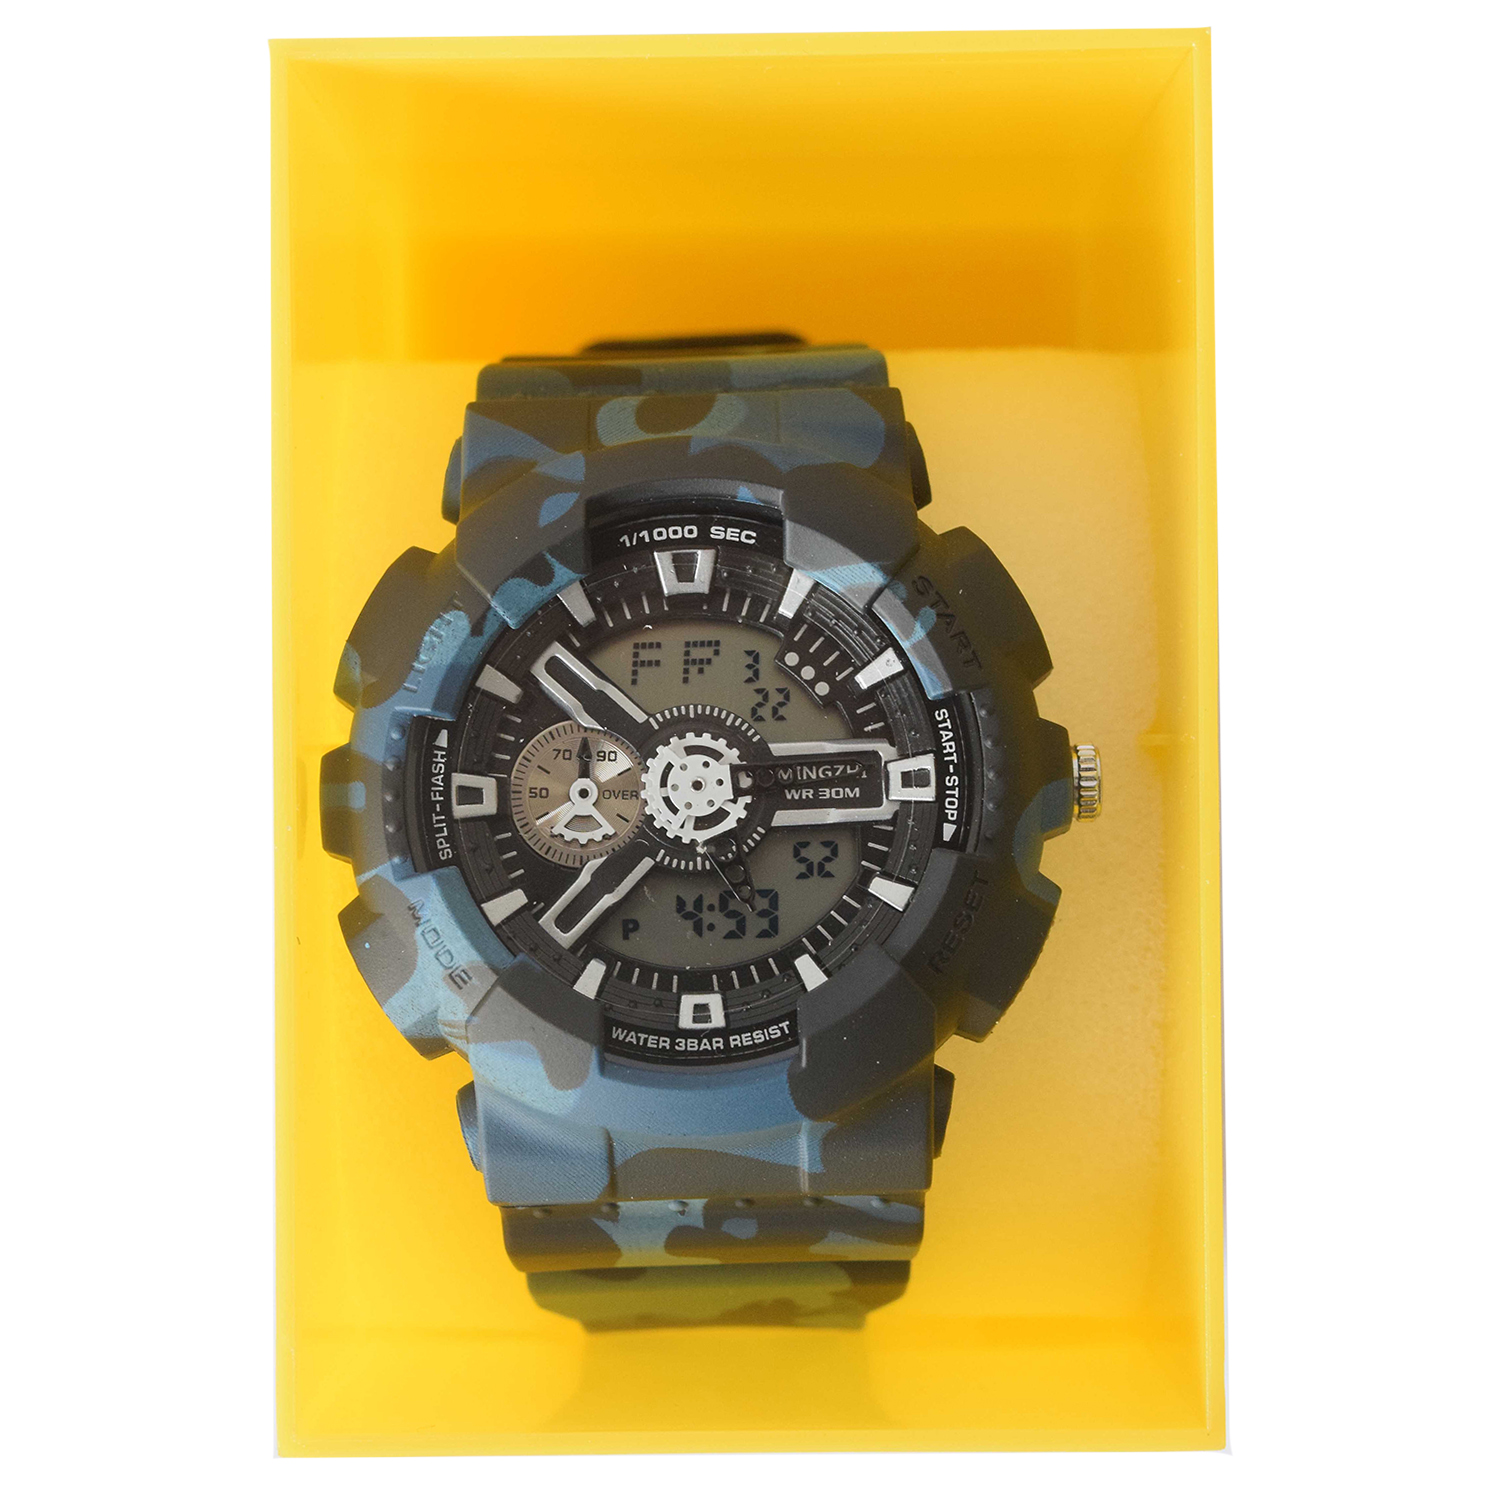 Colour LCD Watch Model #Mix